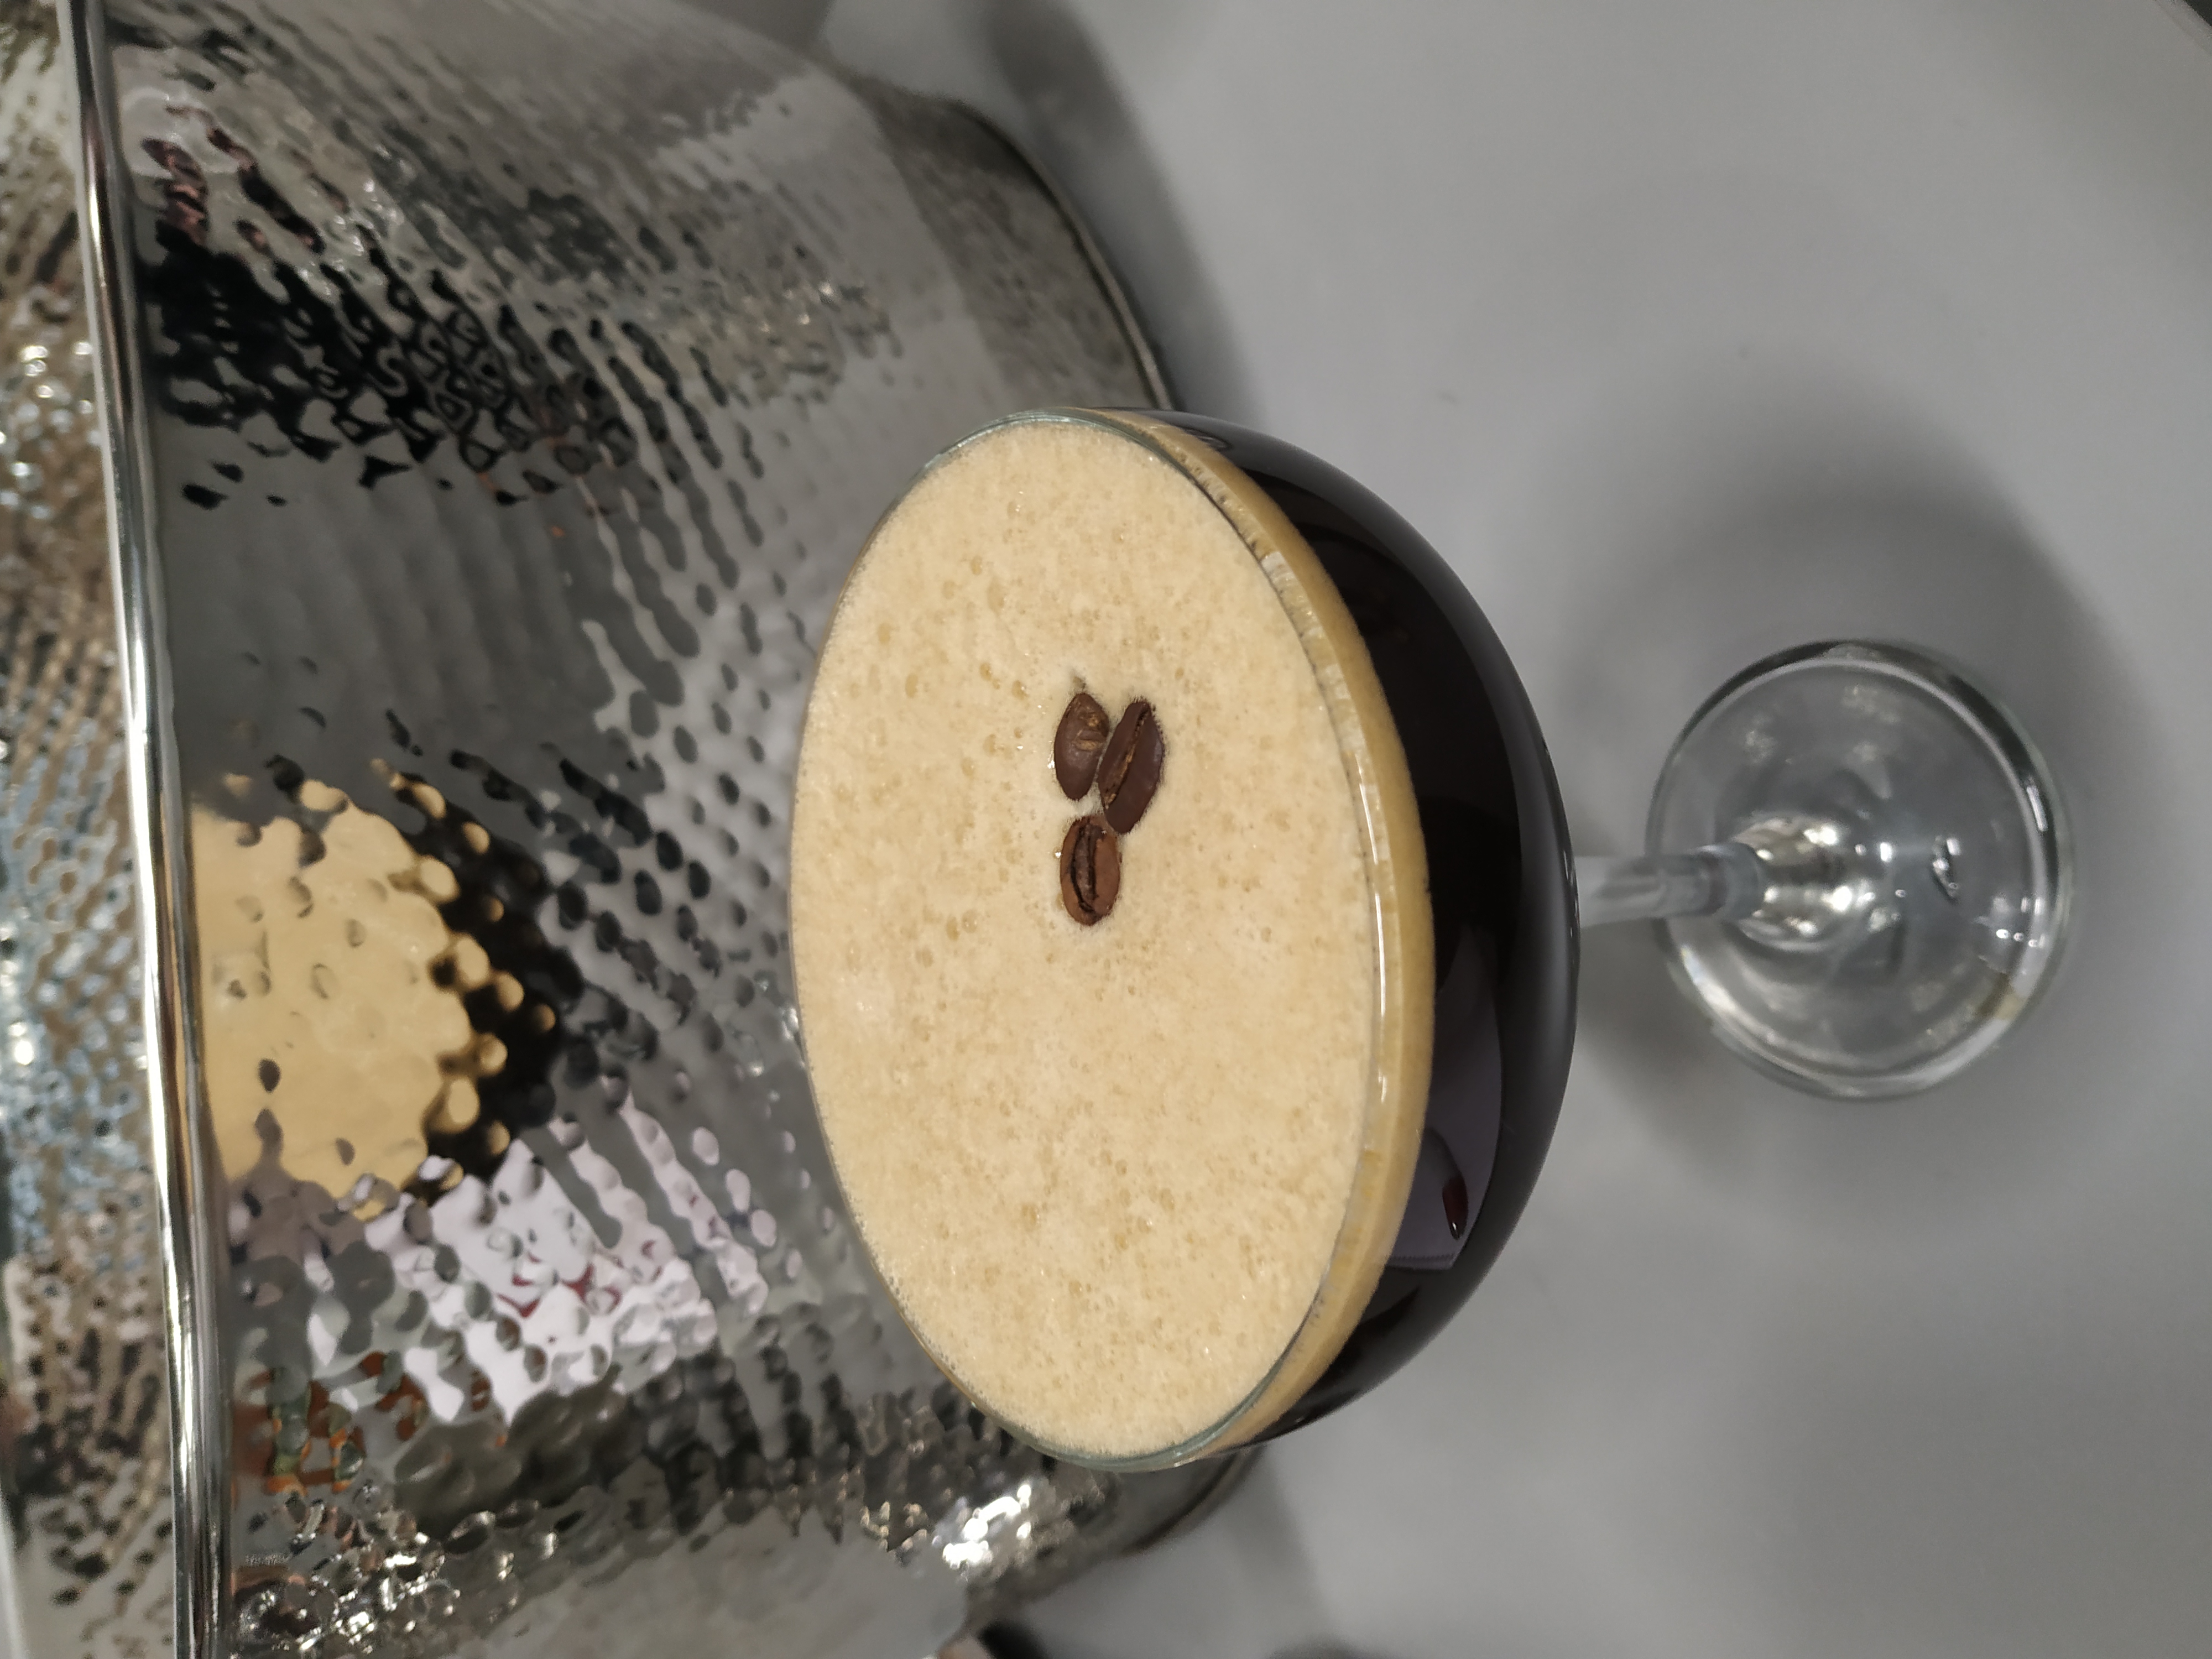 Espresso martini. For coffee lovers everywhere, the espresso martini is the caffeinated cocktail of choice